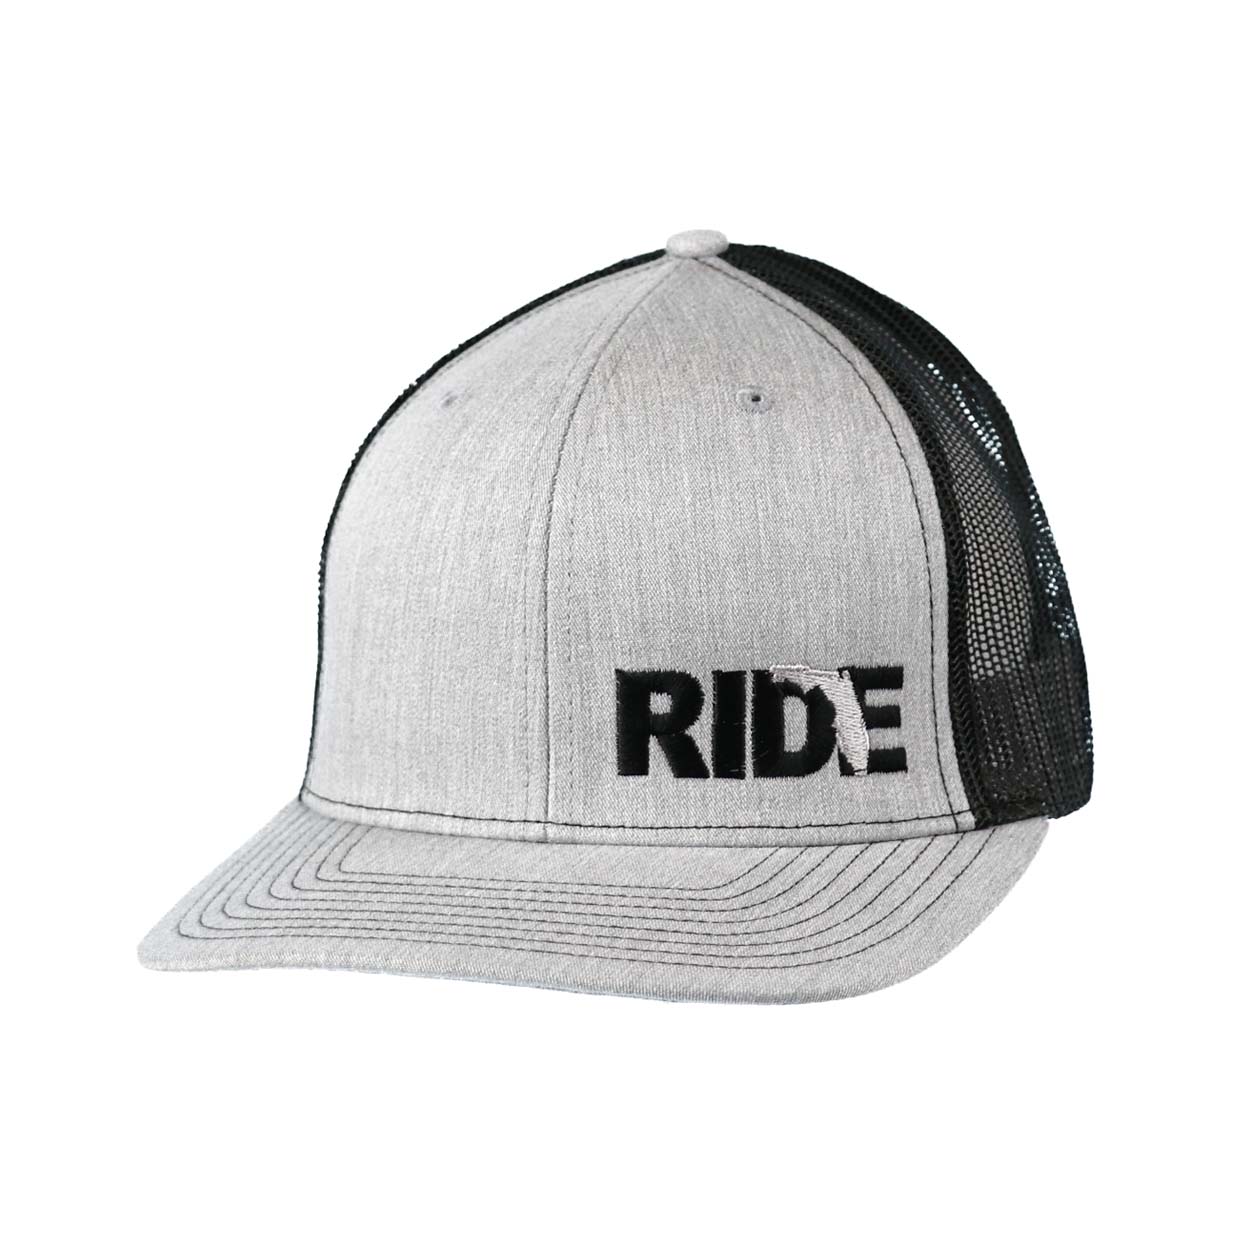 Ride Florida Night Out Pro Embroidered Snapback Trucker Hat Heather Gray/Black